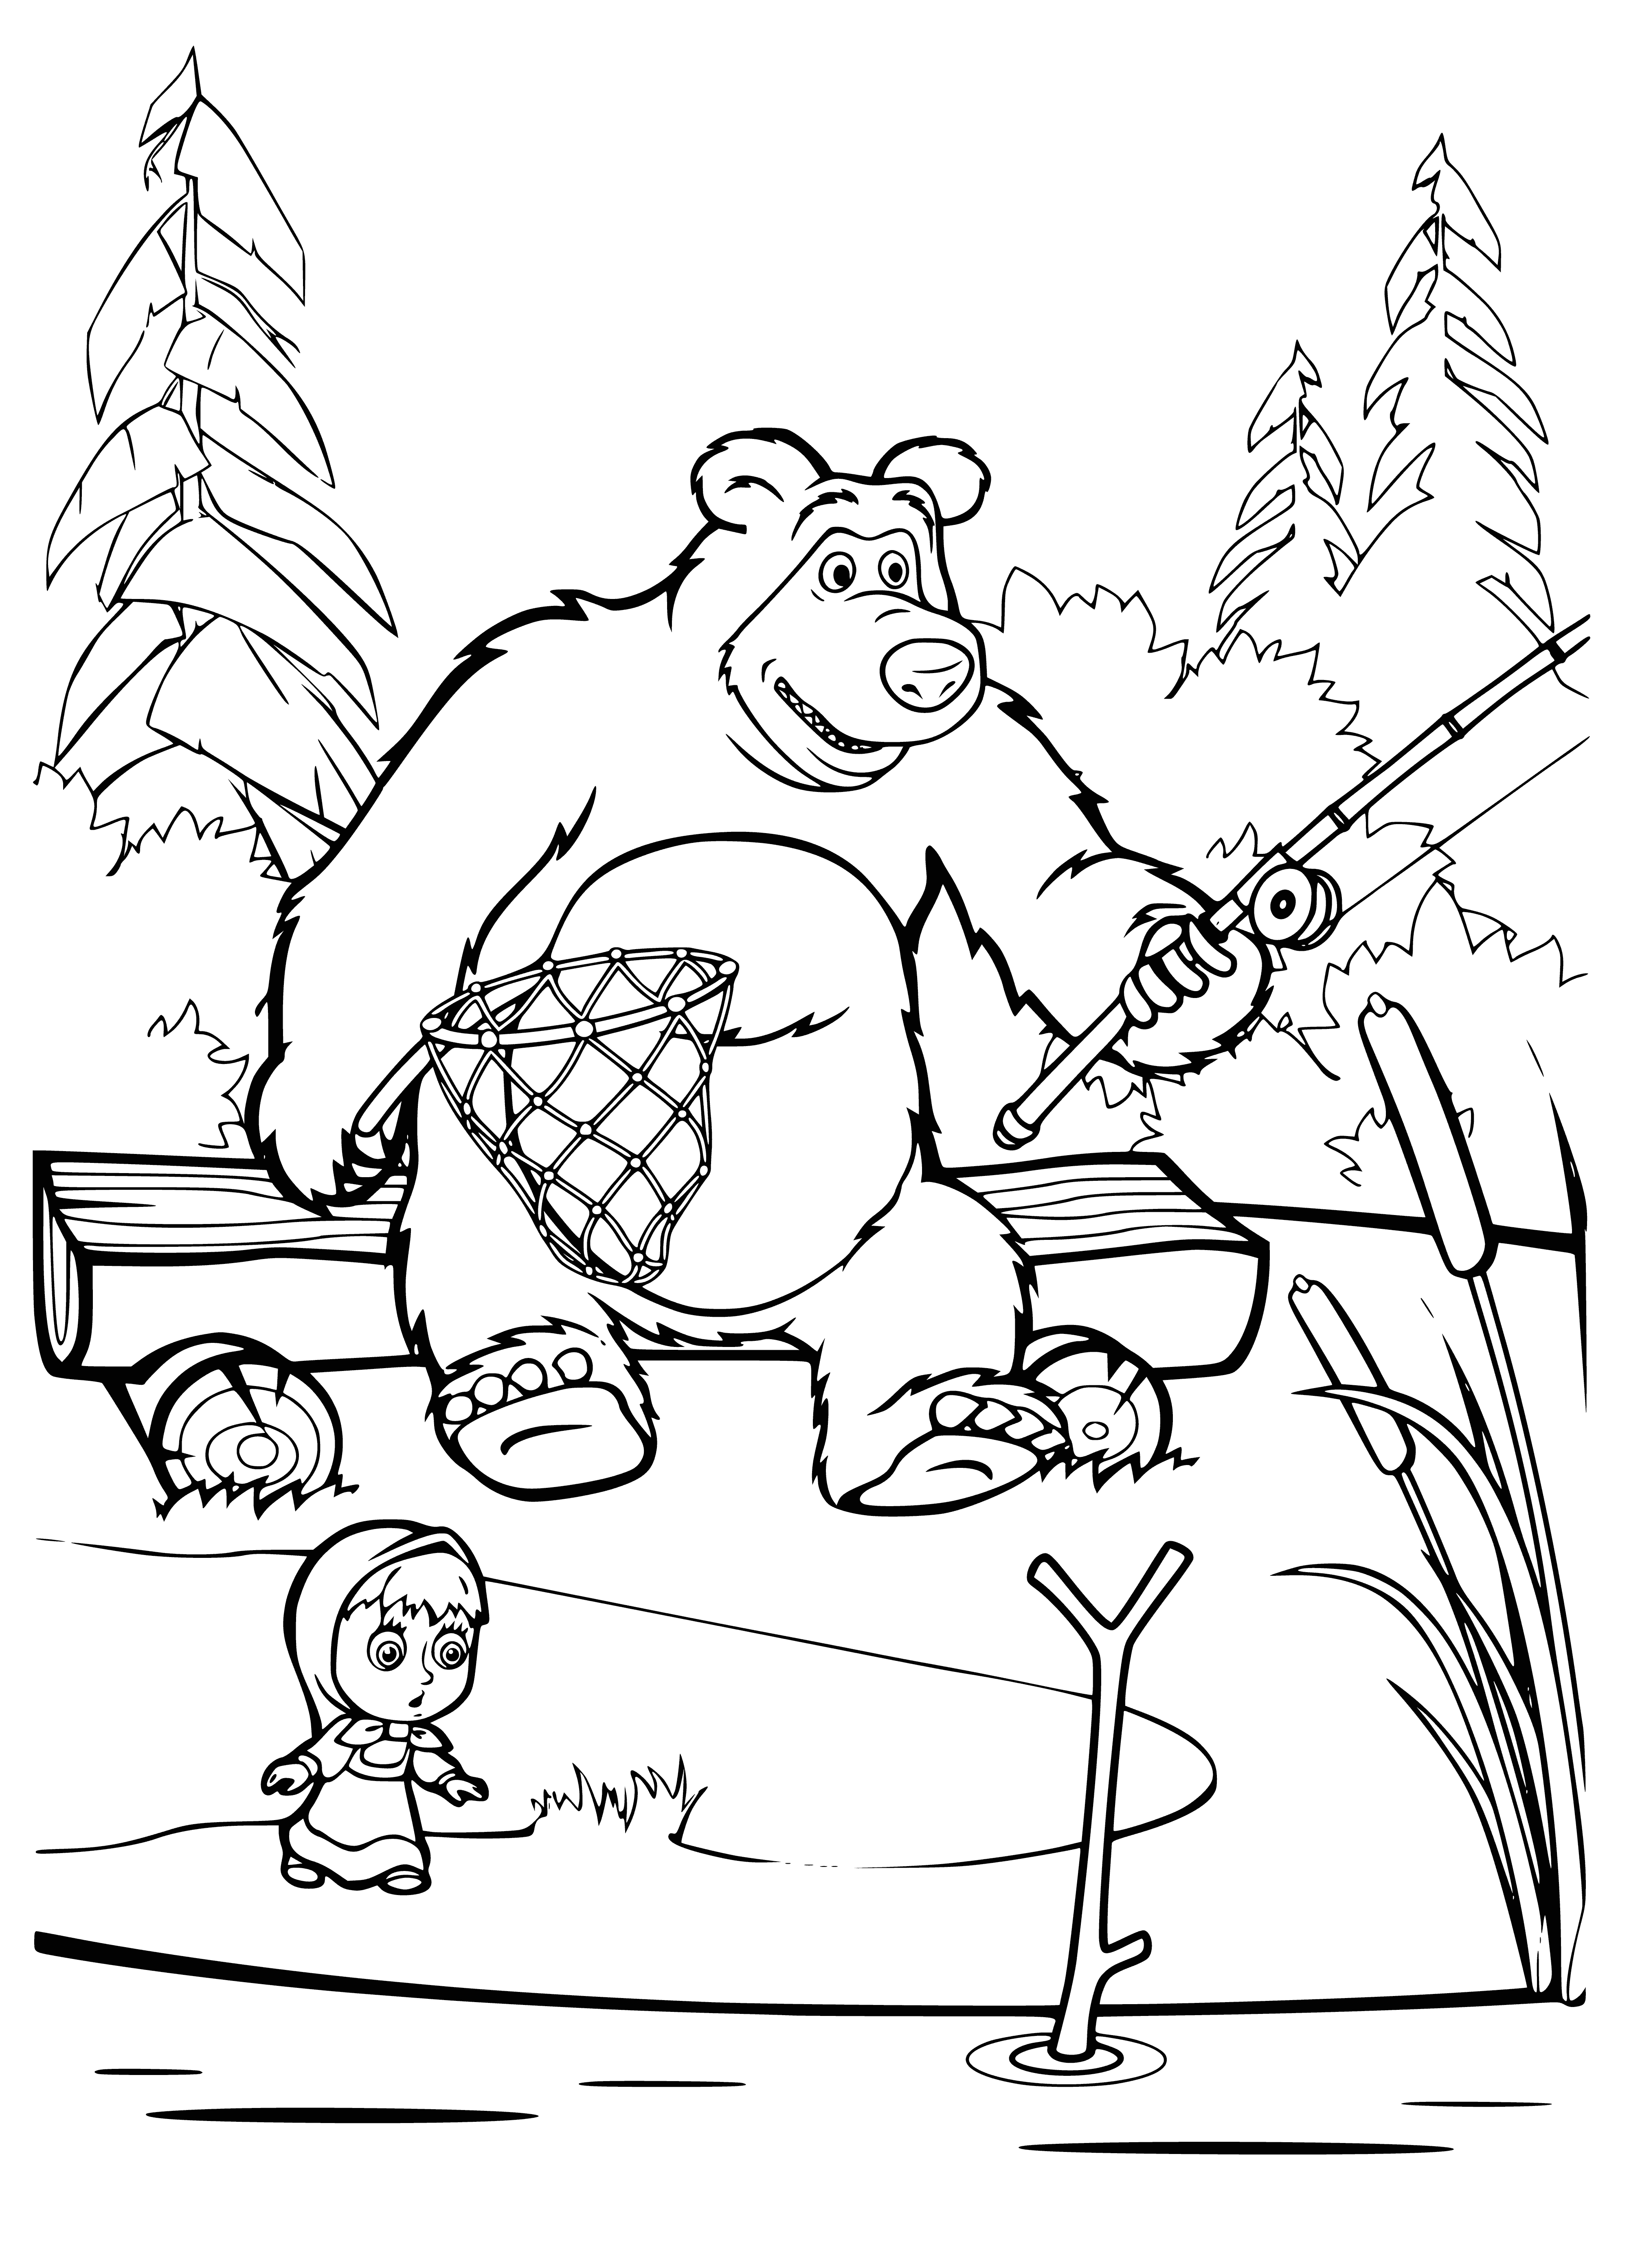 coloring page: He watches the ball with sad eyes.

Bear stands shoreside, watching ball fall into water with sad eyes.